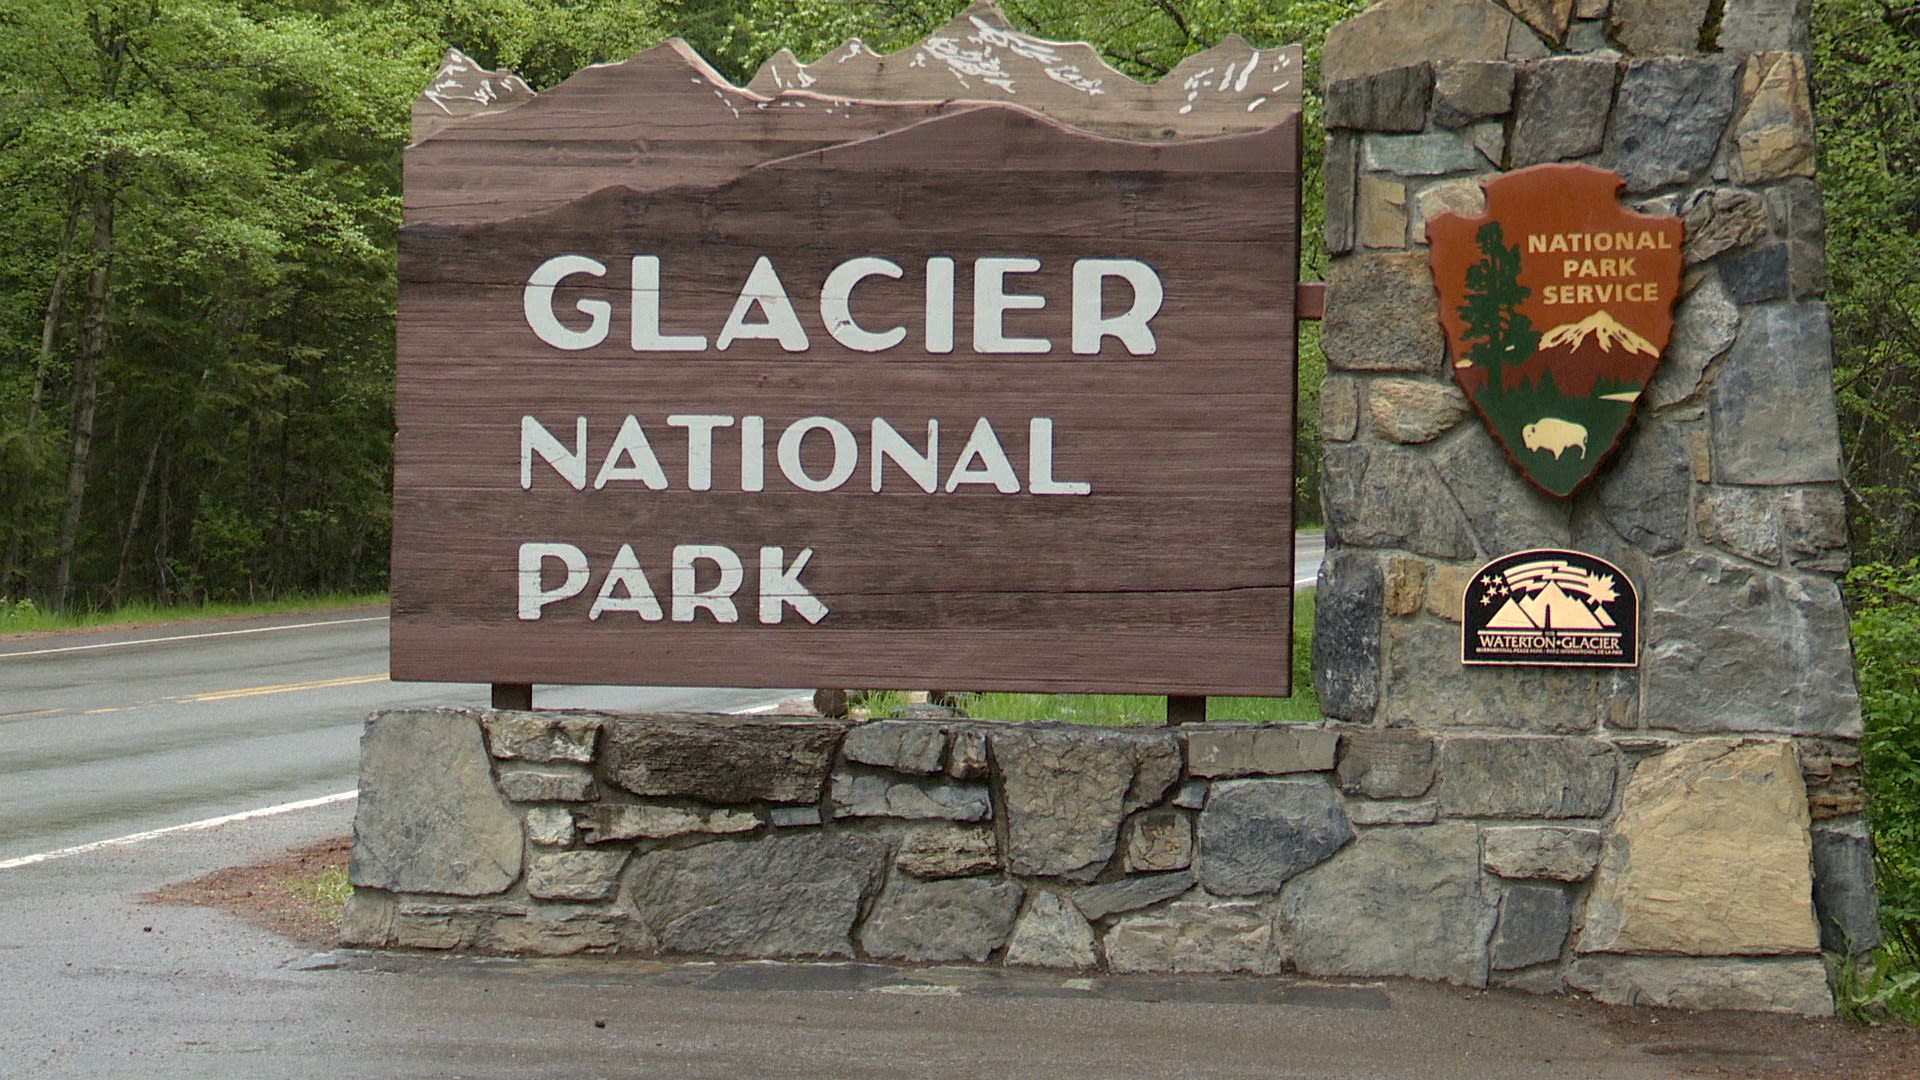 Series of crashes delay traffic on Glacier National Park's Going-to-the-Sun Road